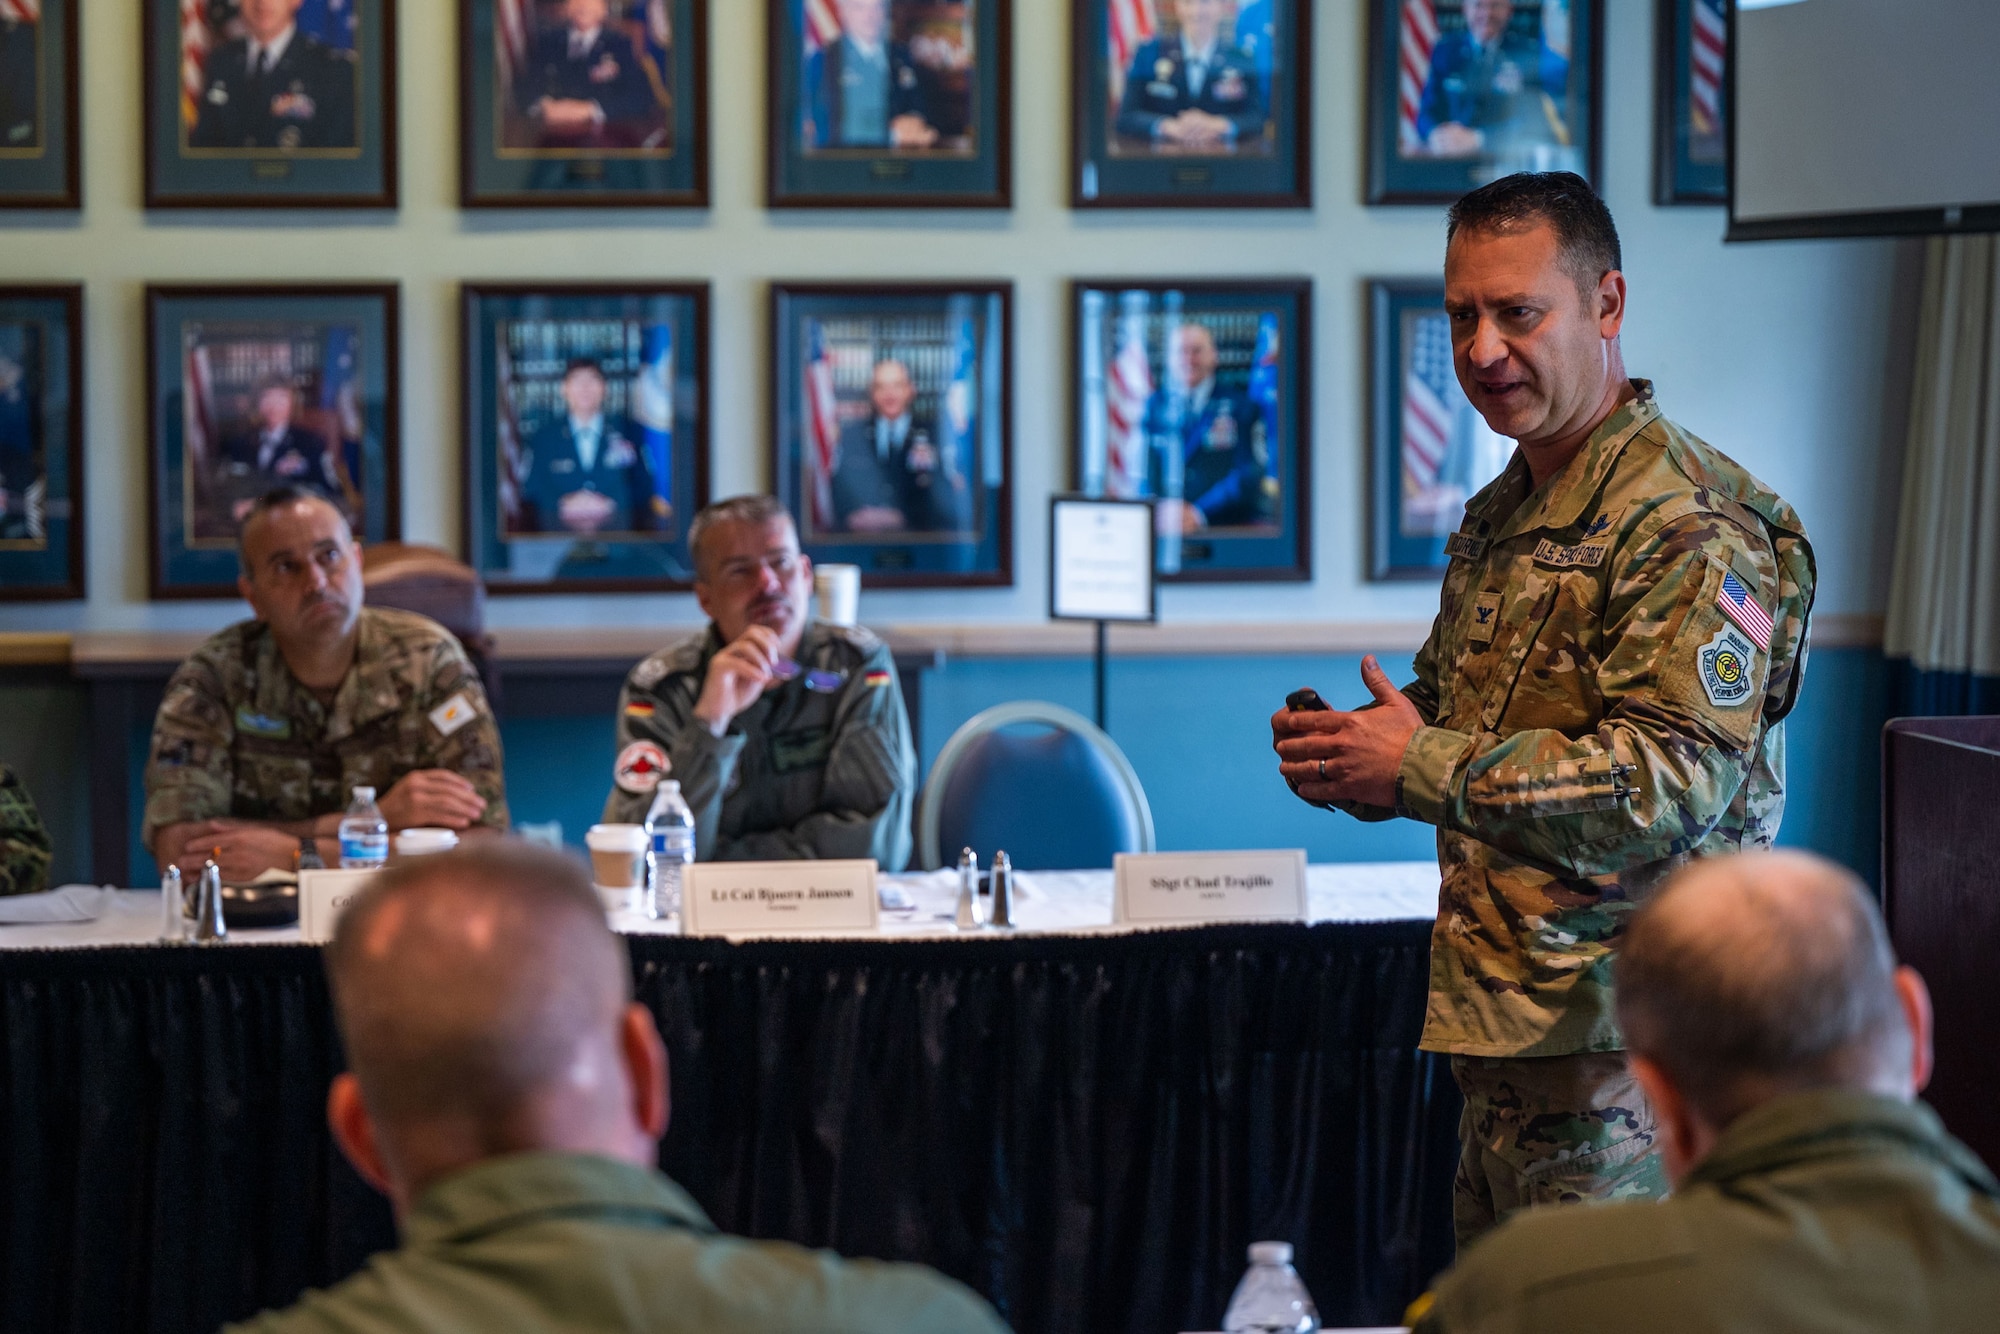 U.S. Space Force Col. Anibal Rodriguez, Space Delta 5 deputy commander, mission brief to Foreign Air Attachés at the Pacific Coast Club on Vandenberg Space Force Base, Calif., May 3, 2023. Hosted by CFSCC, the group was part of a Secretary of the Air Force International Affairs (SAF/IA)-sponsored tour for D.C.-based Foreign Air Attachés from 15 different countries. Led by U.S. Air Force Maj. Gen. Julian C. Cheater, Assistant Deputy Under SAF/IA, this DoD-level program aims to orient Attachés to DoD organizations and provide strategic messaging to senior foreign leaders, and is executed on behalf of the USAF Chief of Staff Gen. Charles Q. Brown. (U.S. Space Force photo by Tech. Sgt. Luke Kitterman)